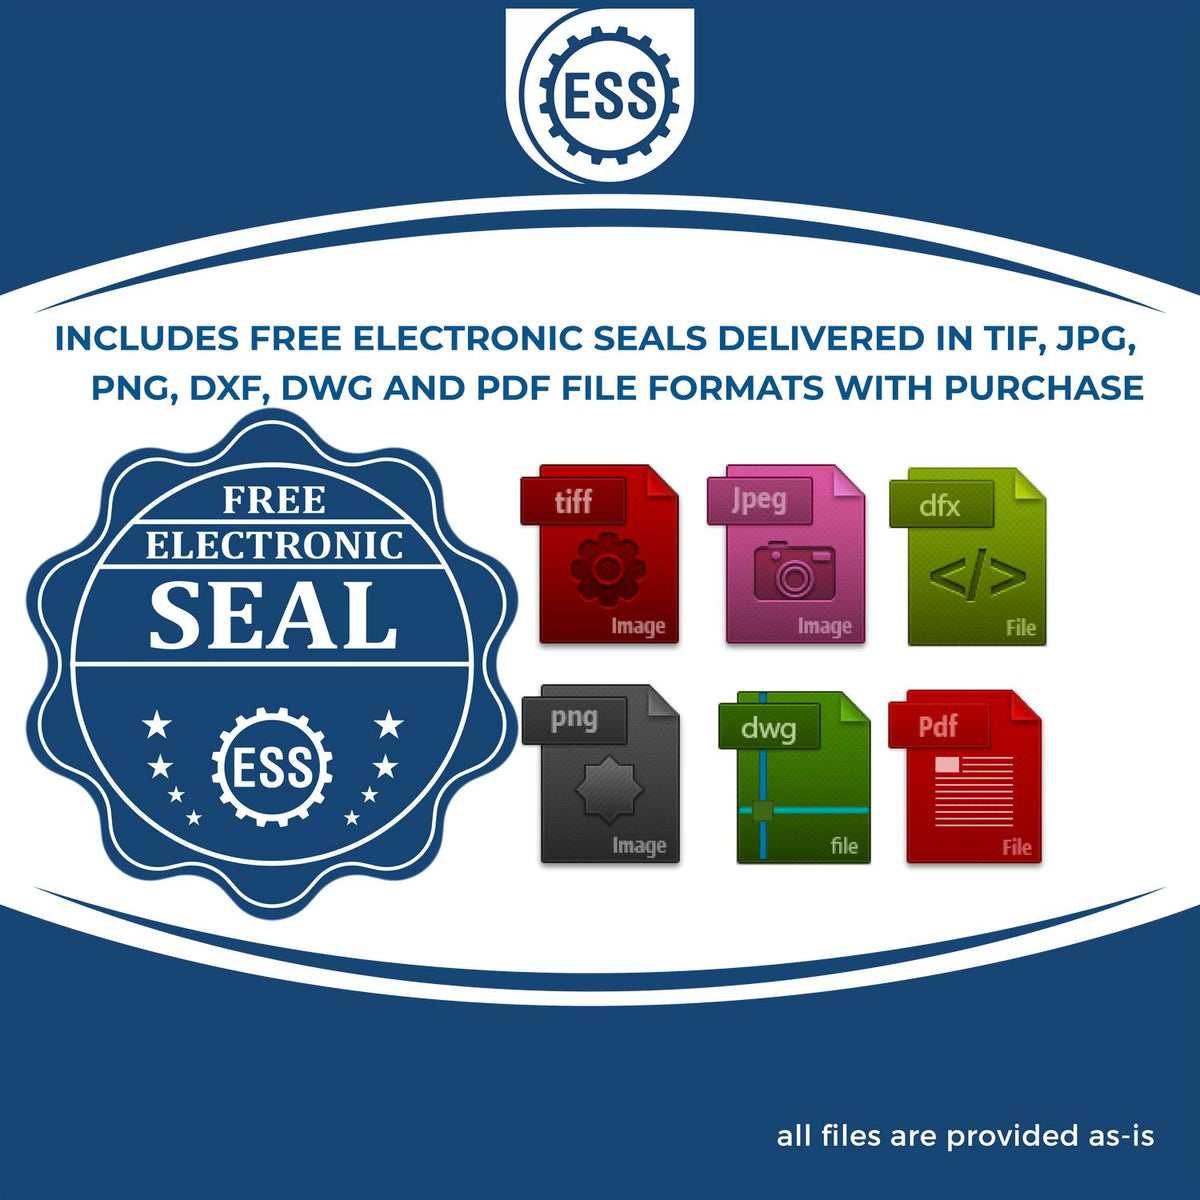 An infographic for the free electronic seal for the Slim Pre-Inked Ohio Landscape Architect Seal Stamp illustrating the different file type icons such as DXF, DWG, TIF, JPG and PNG.